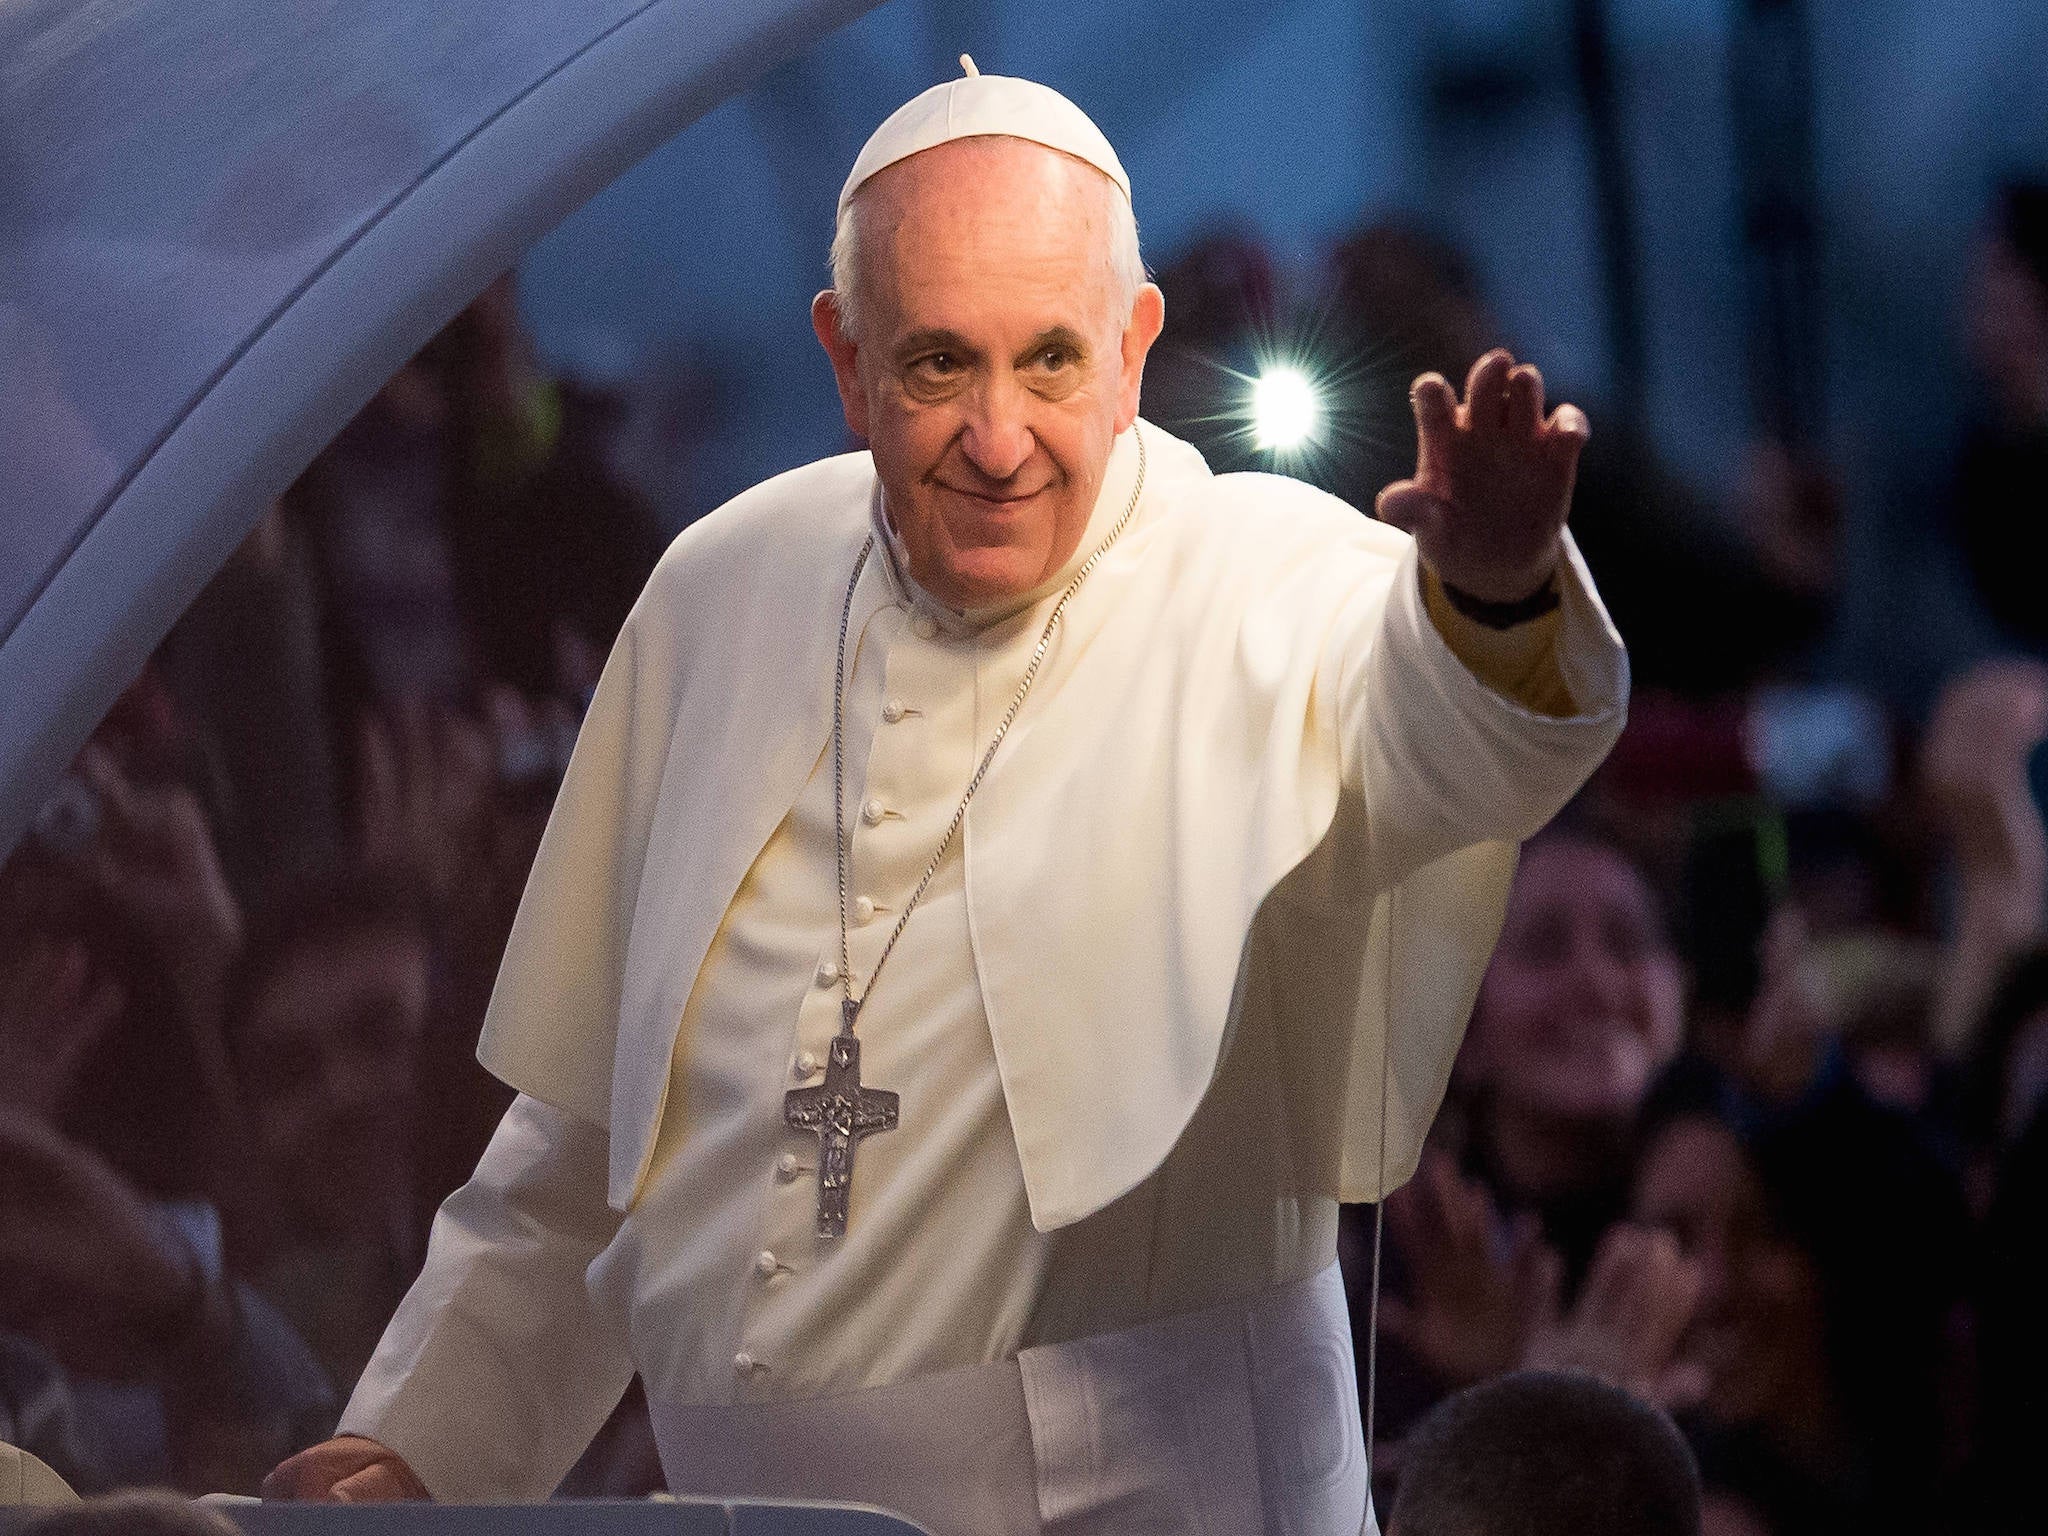 Pope Francis is the first Latin American pontiff